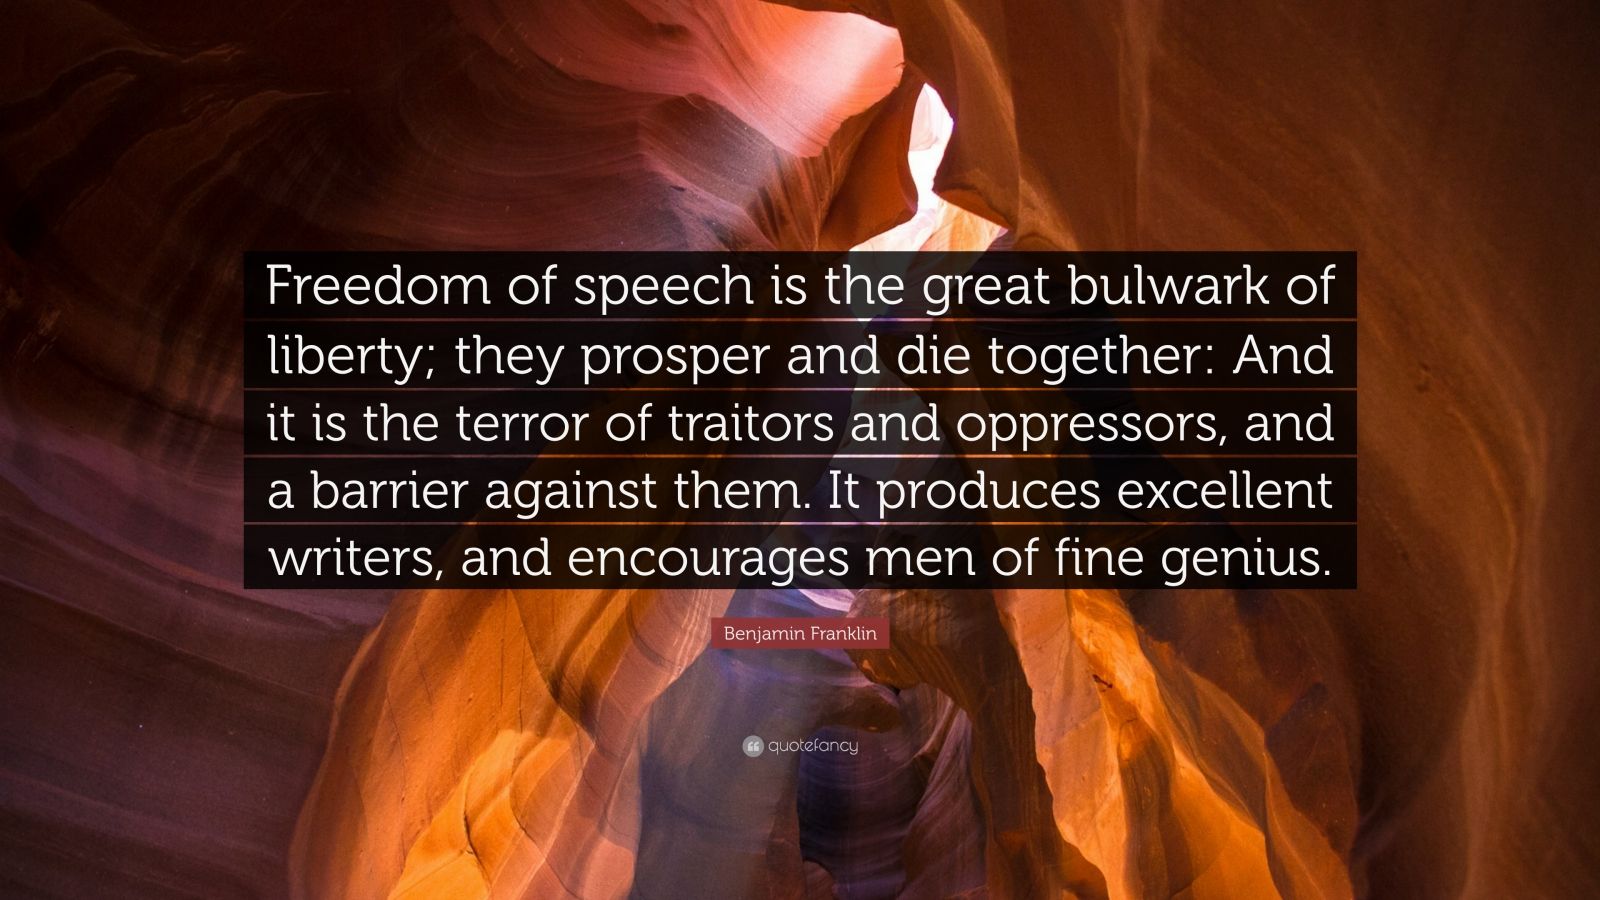 words for liberty of speech